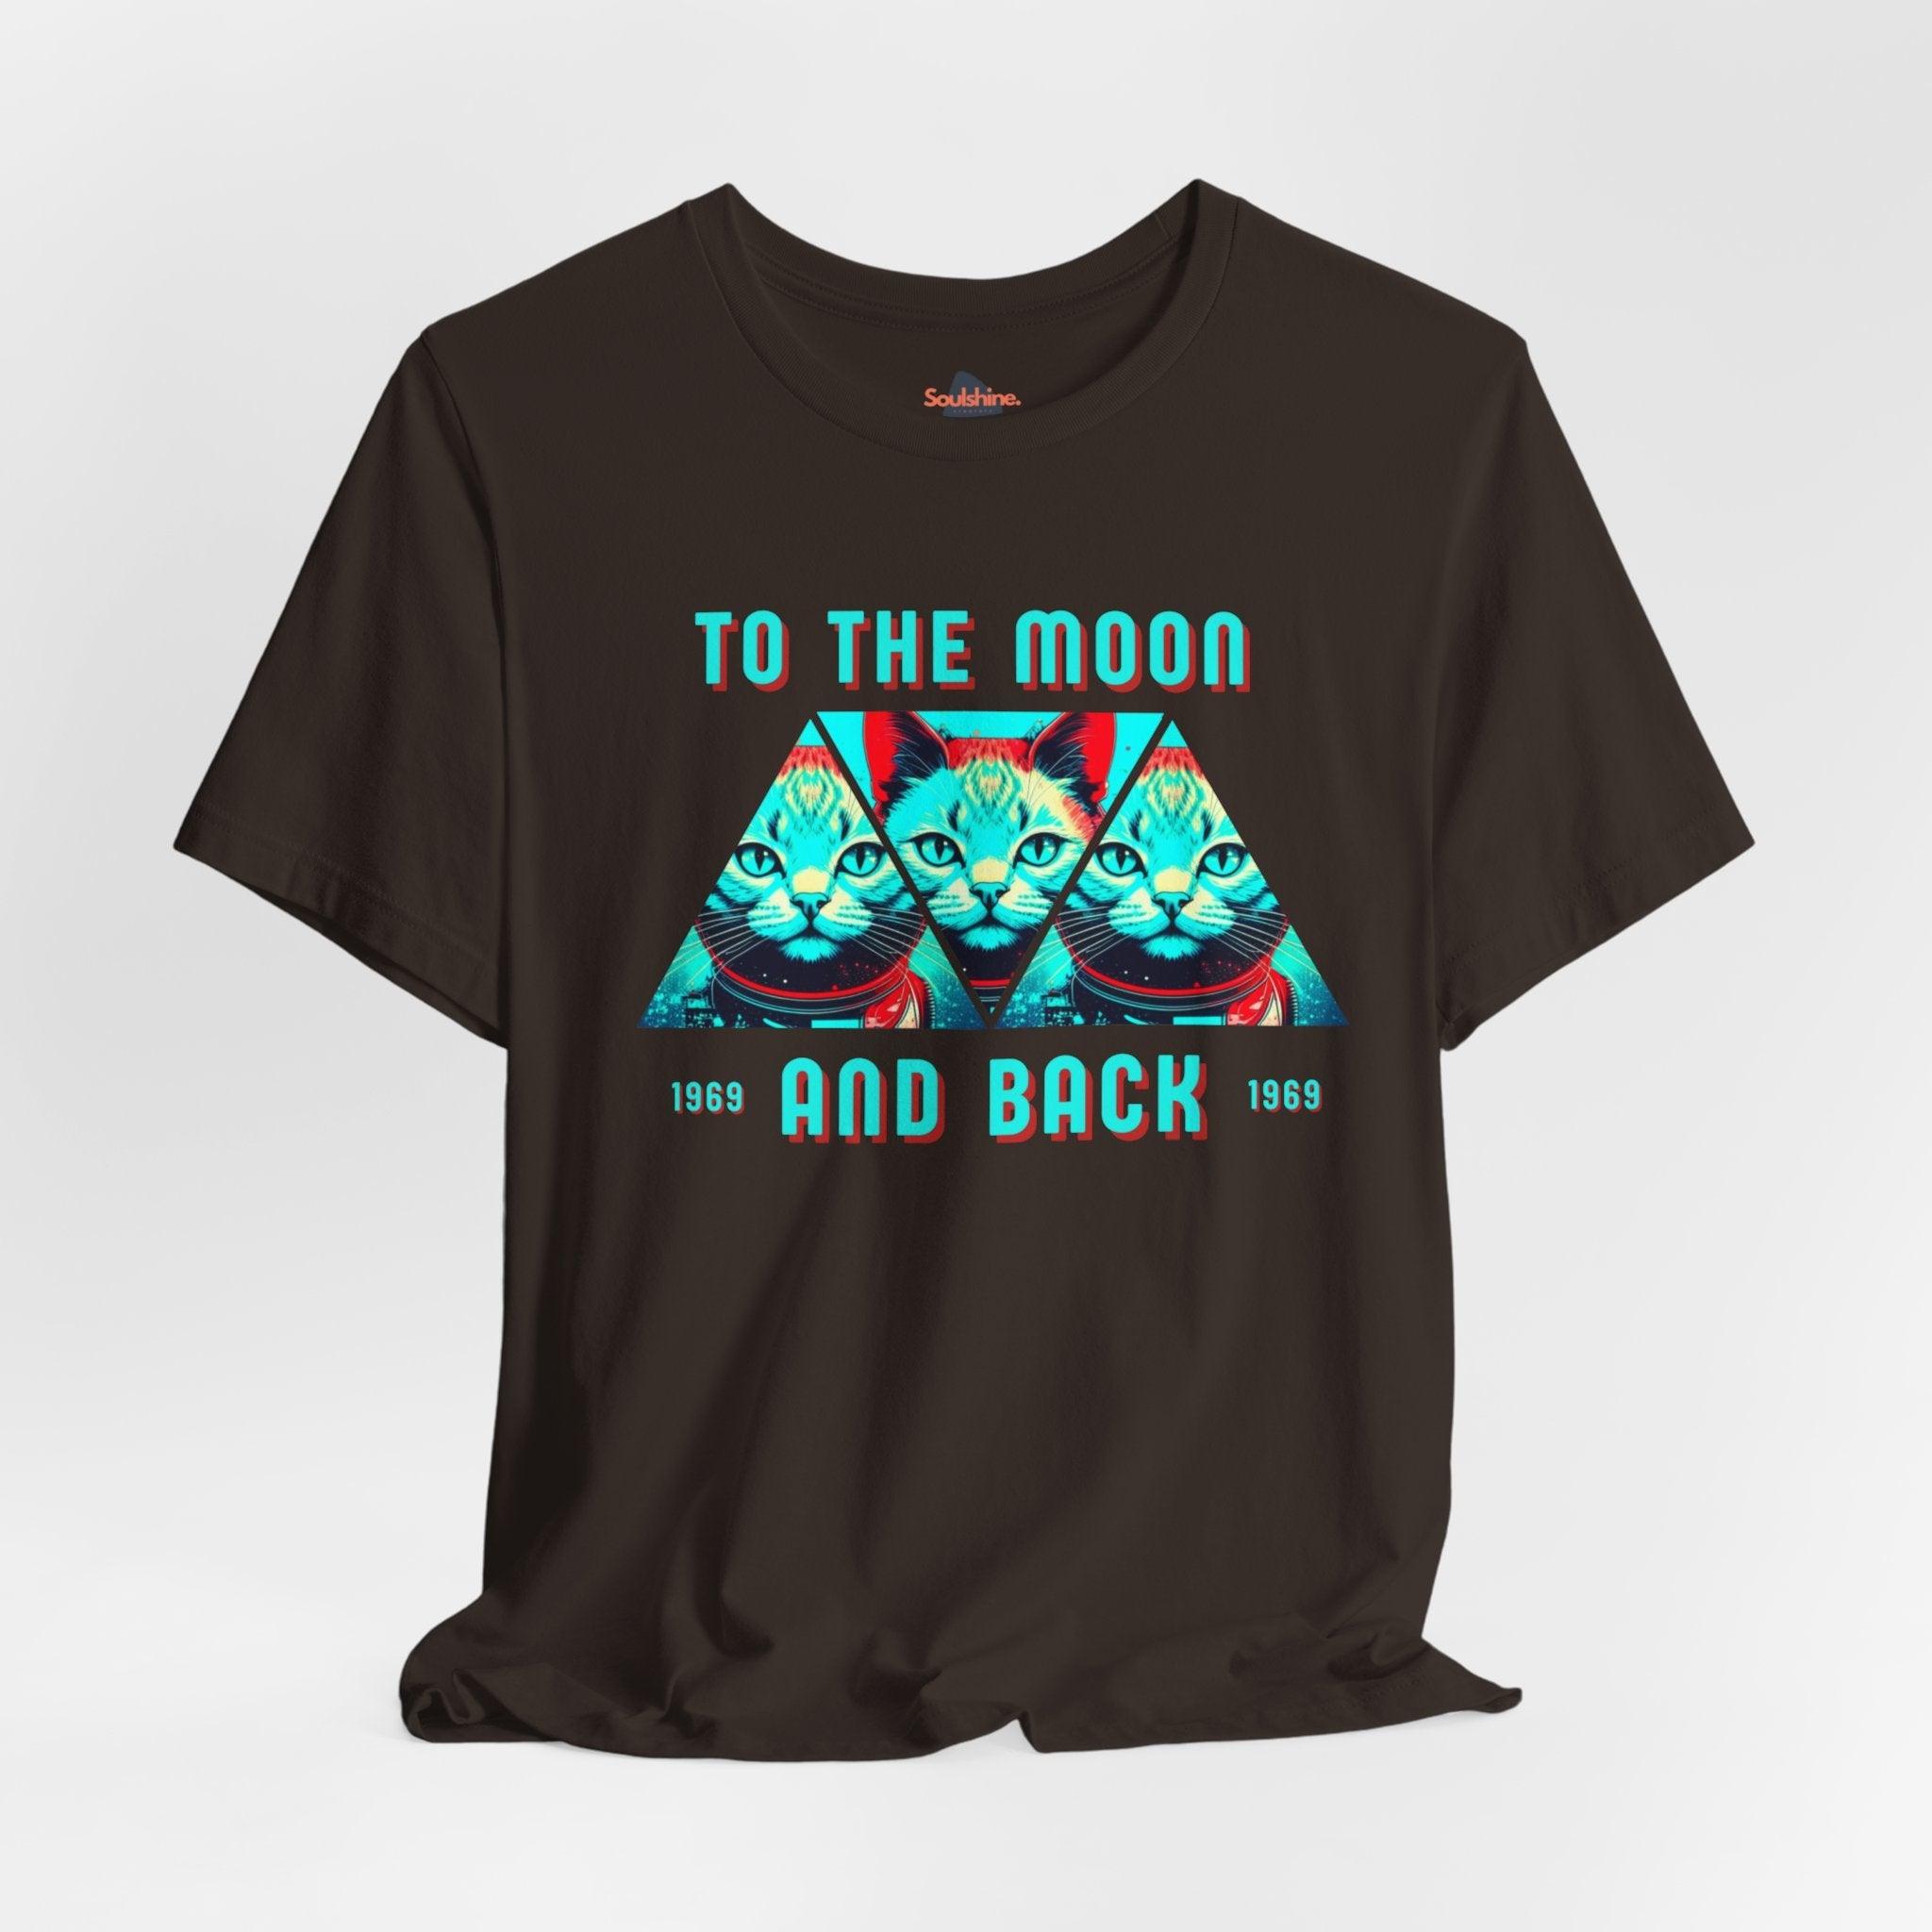 To the moon and back - Soulshinecreators - Unisex Jersey Short Sleeve Tee - US Brown S T-Shirt by Soulshinecreators | Soulshinecreators